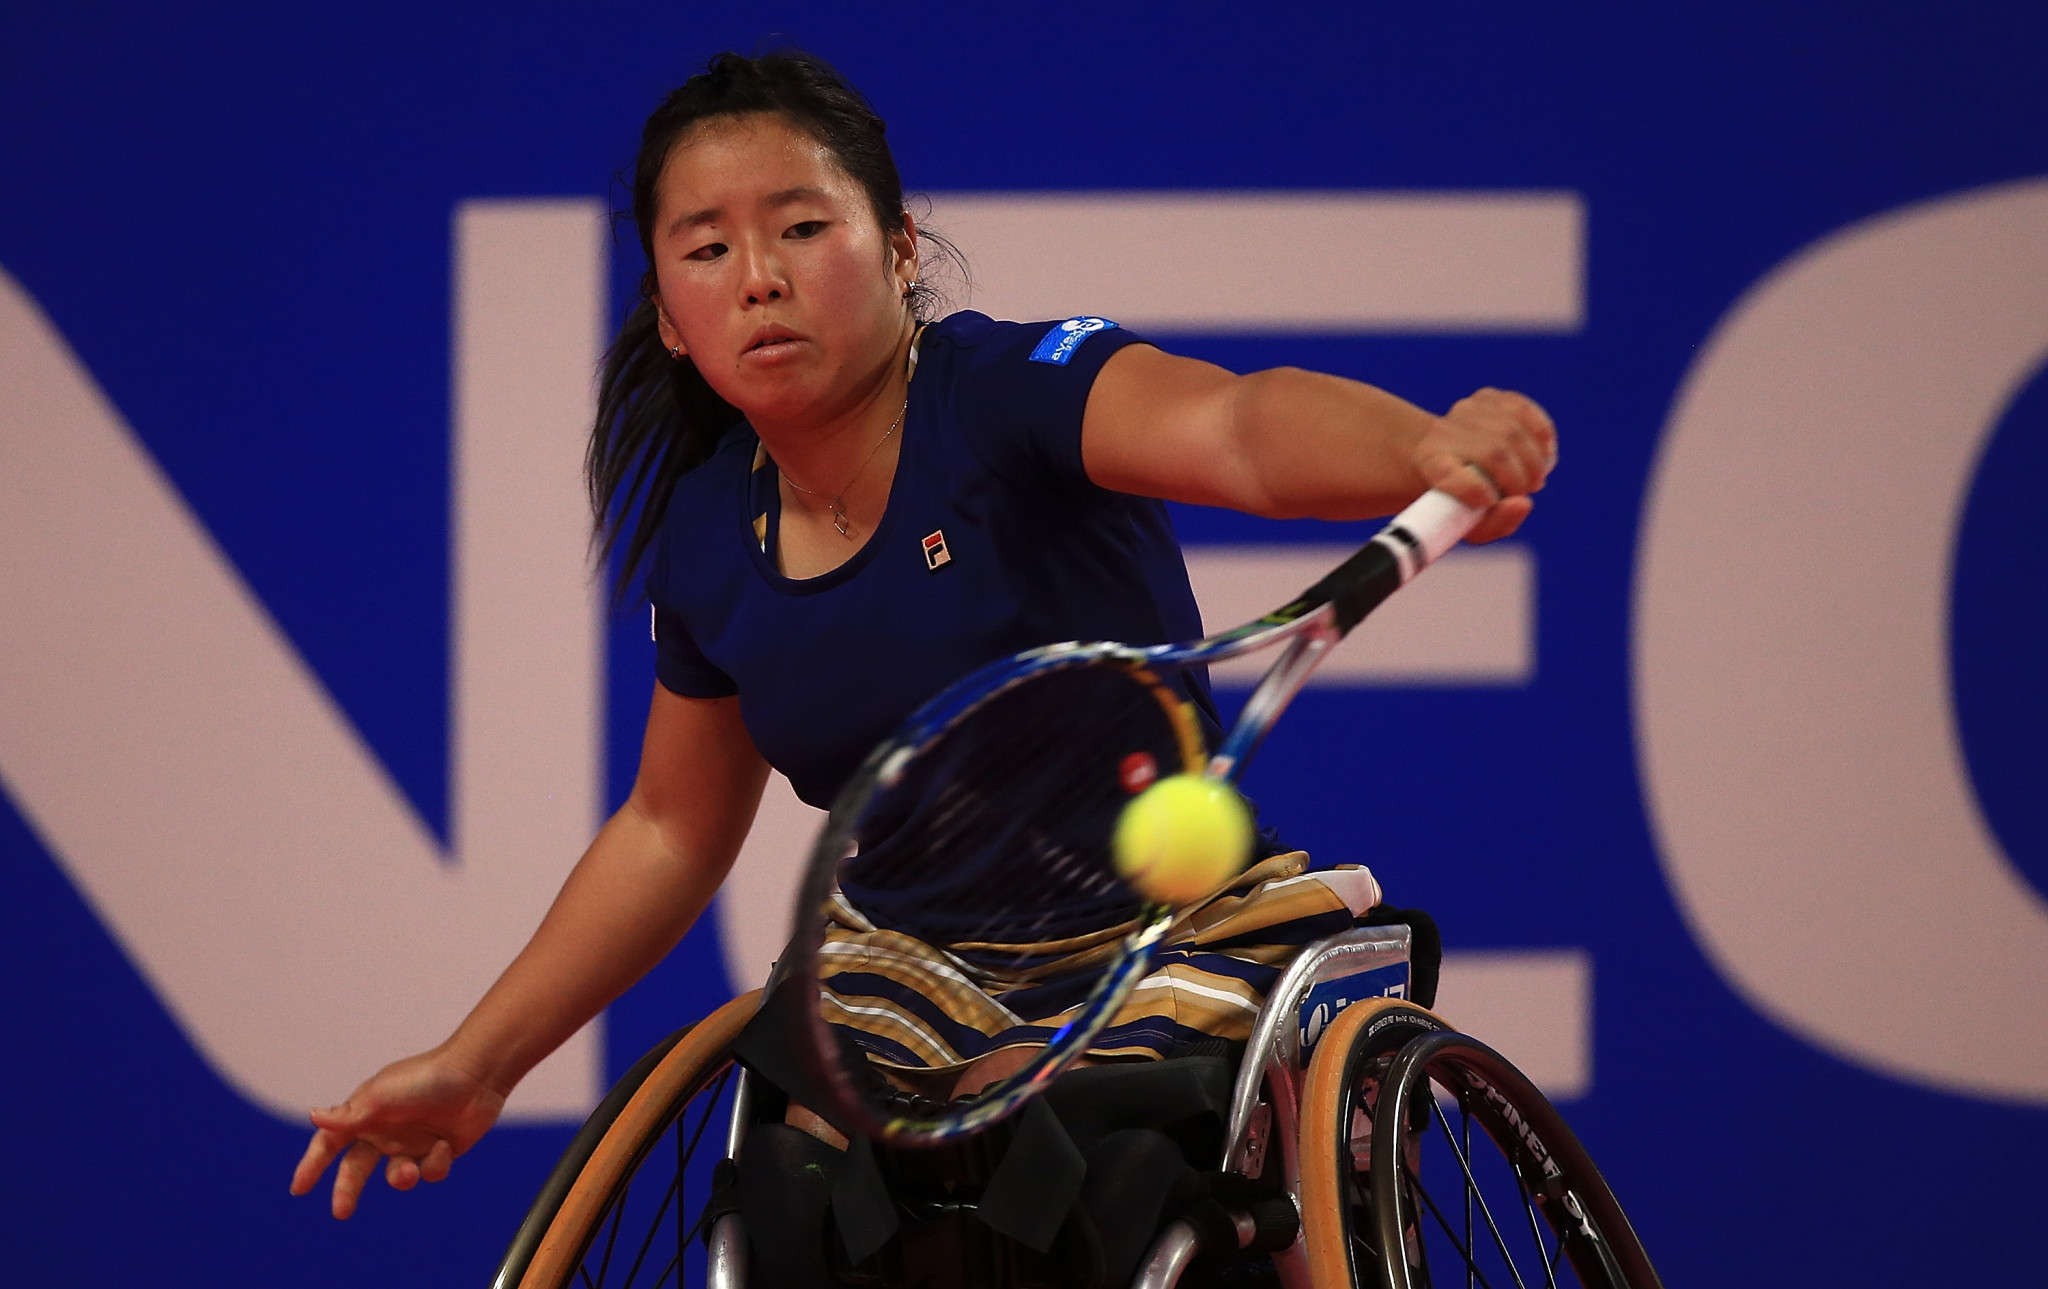 NEC Corporation extends wheelchair tennis partnership for three years